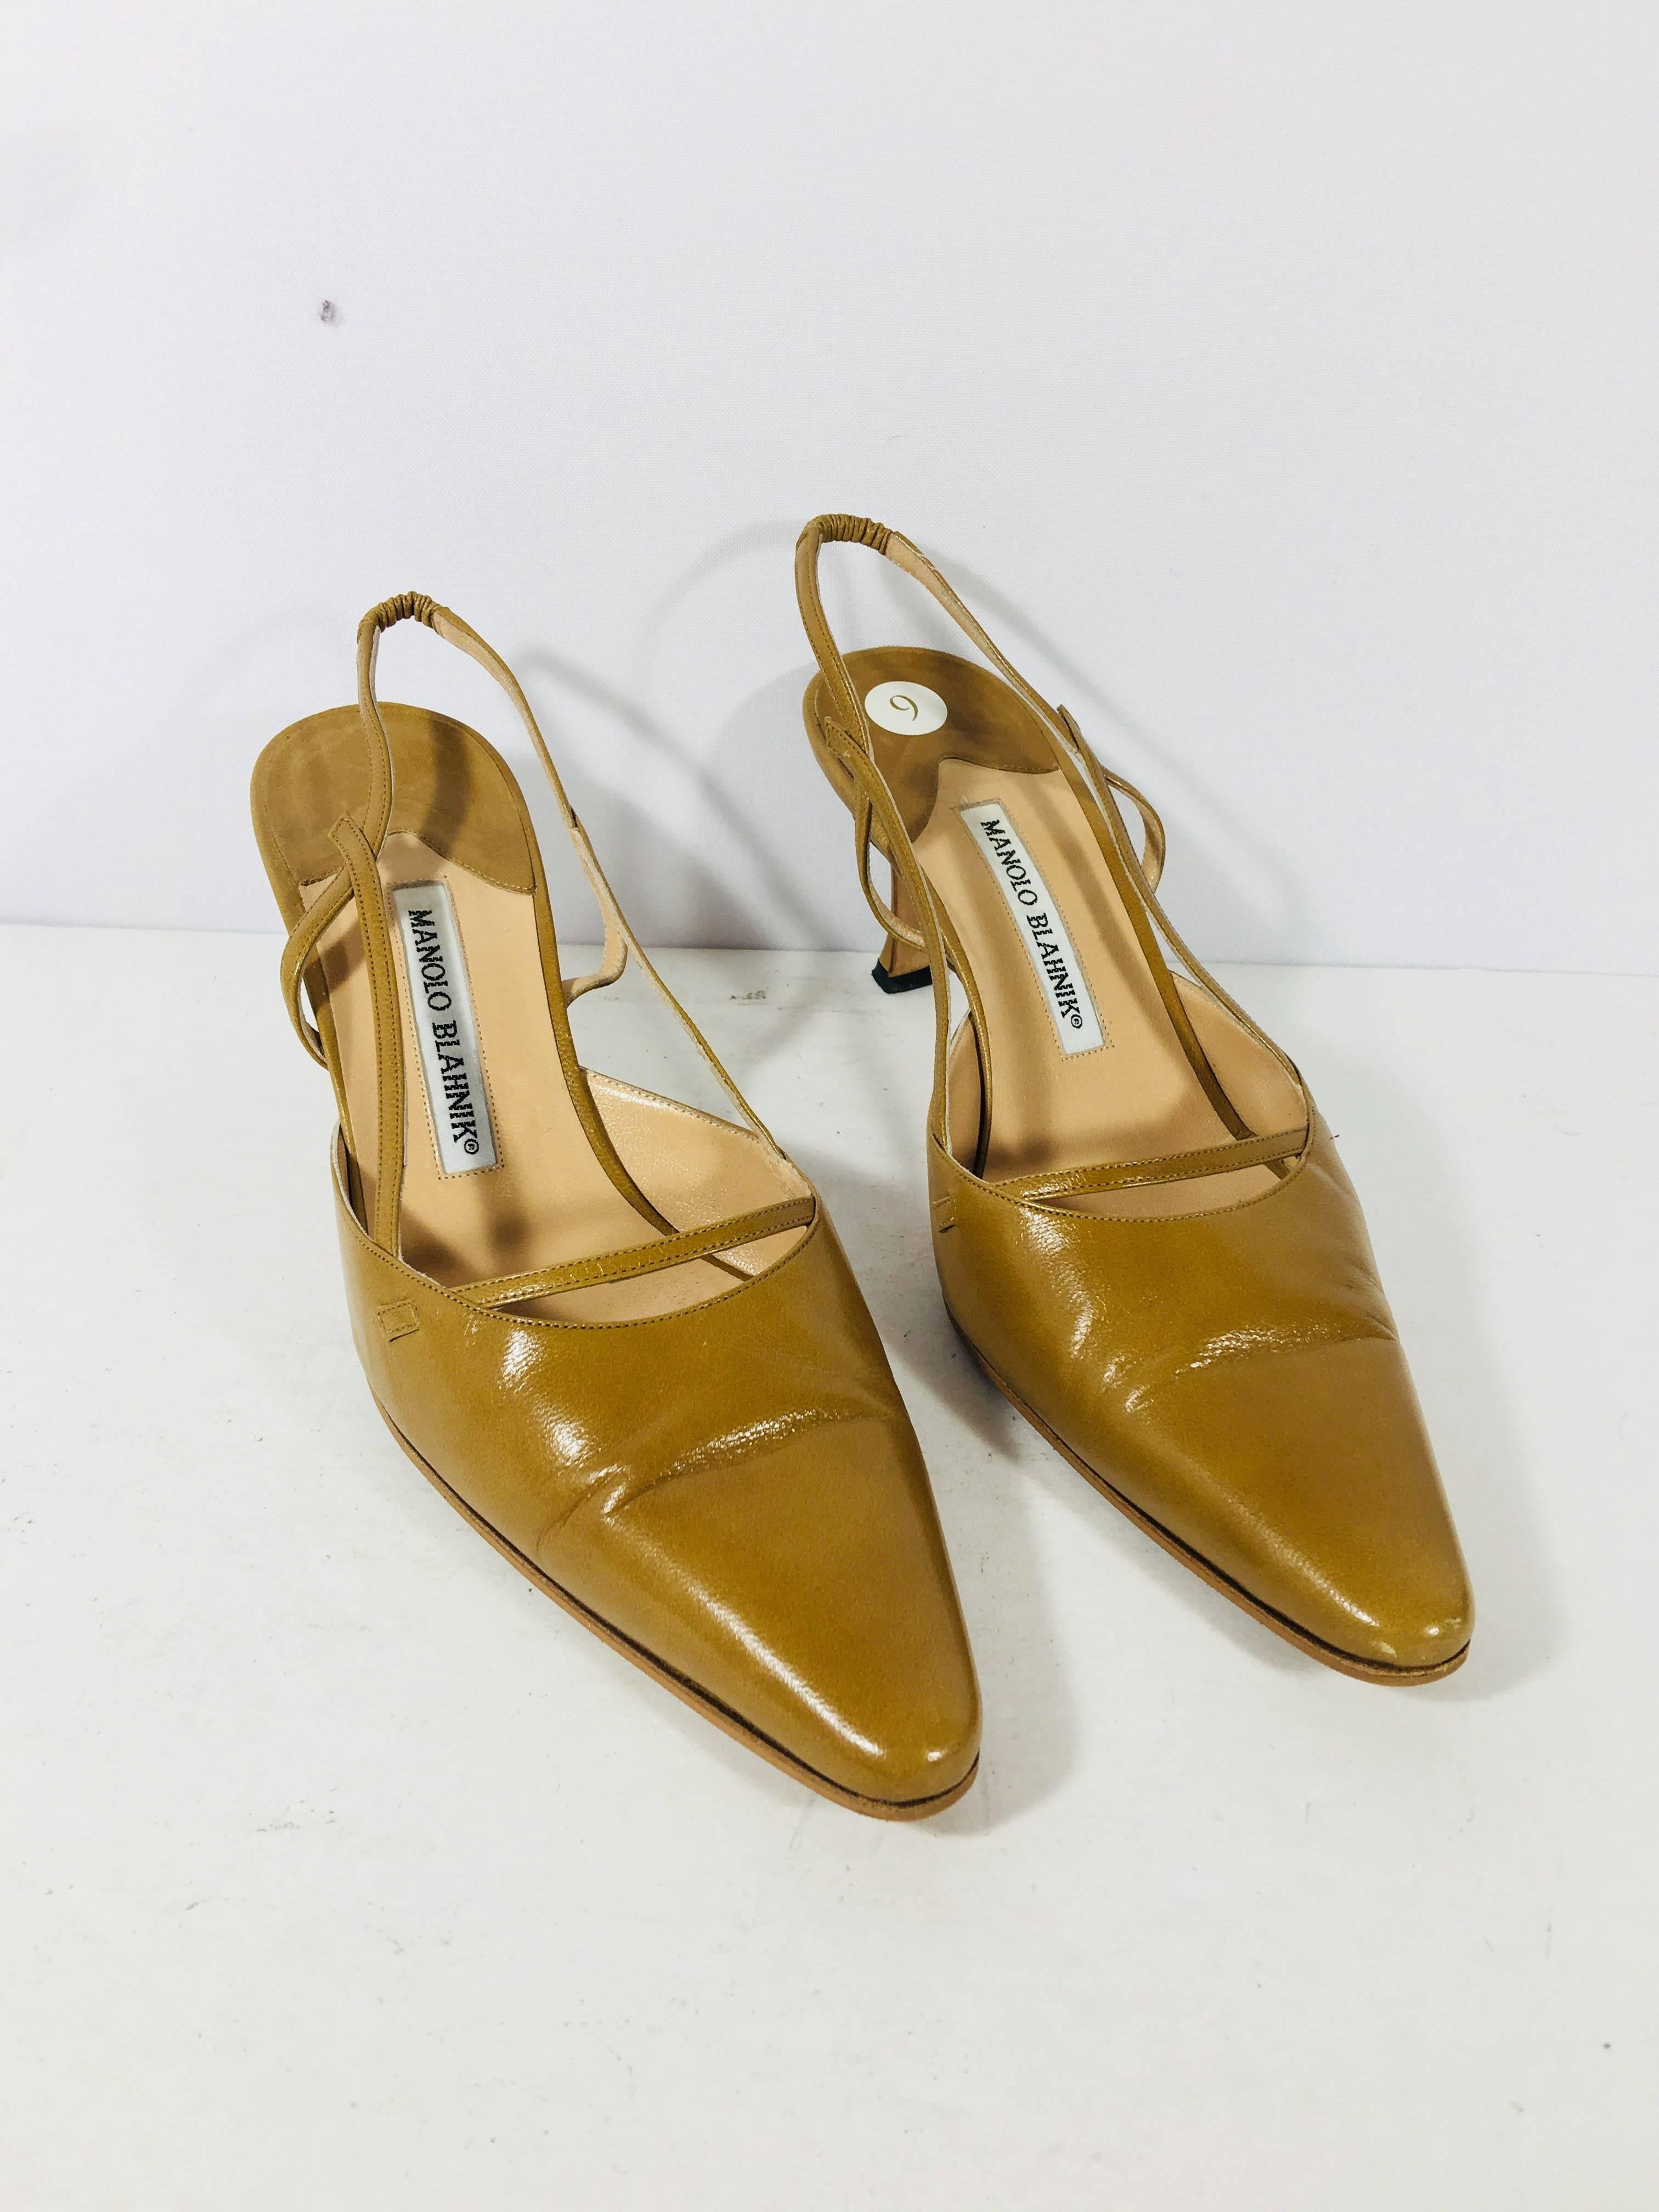 Manolo Blahnik Sling backs with Pointed Toe in Nude Leather. 